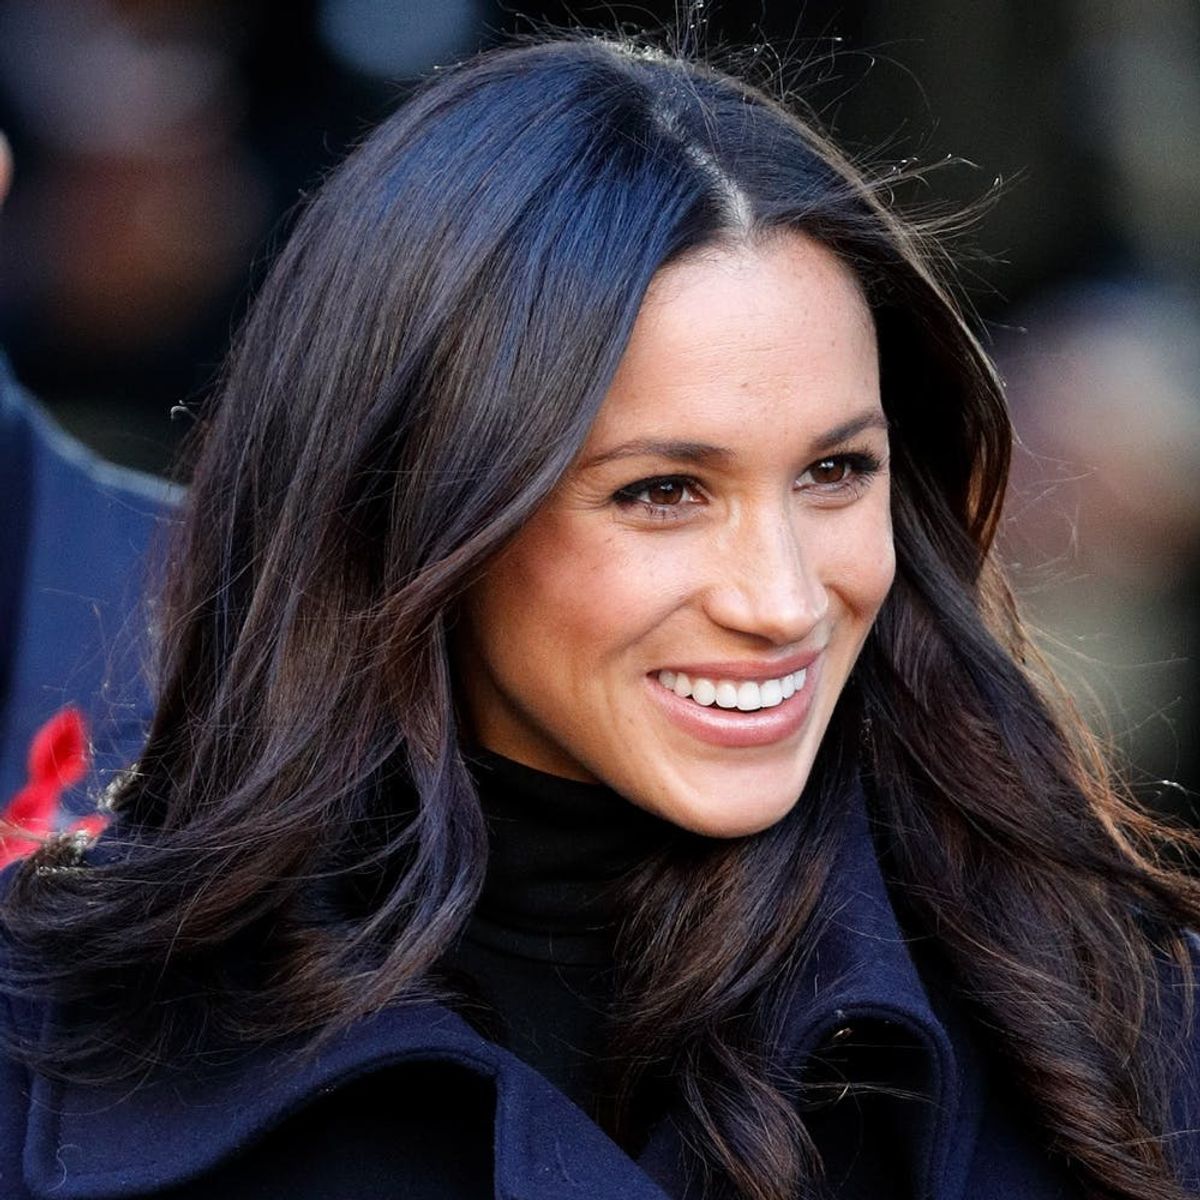 The 12 Best Beauty Hacks Meghan Markle, Kim Kardashian, and More Shared in 2017